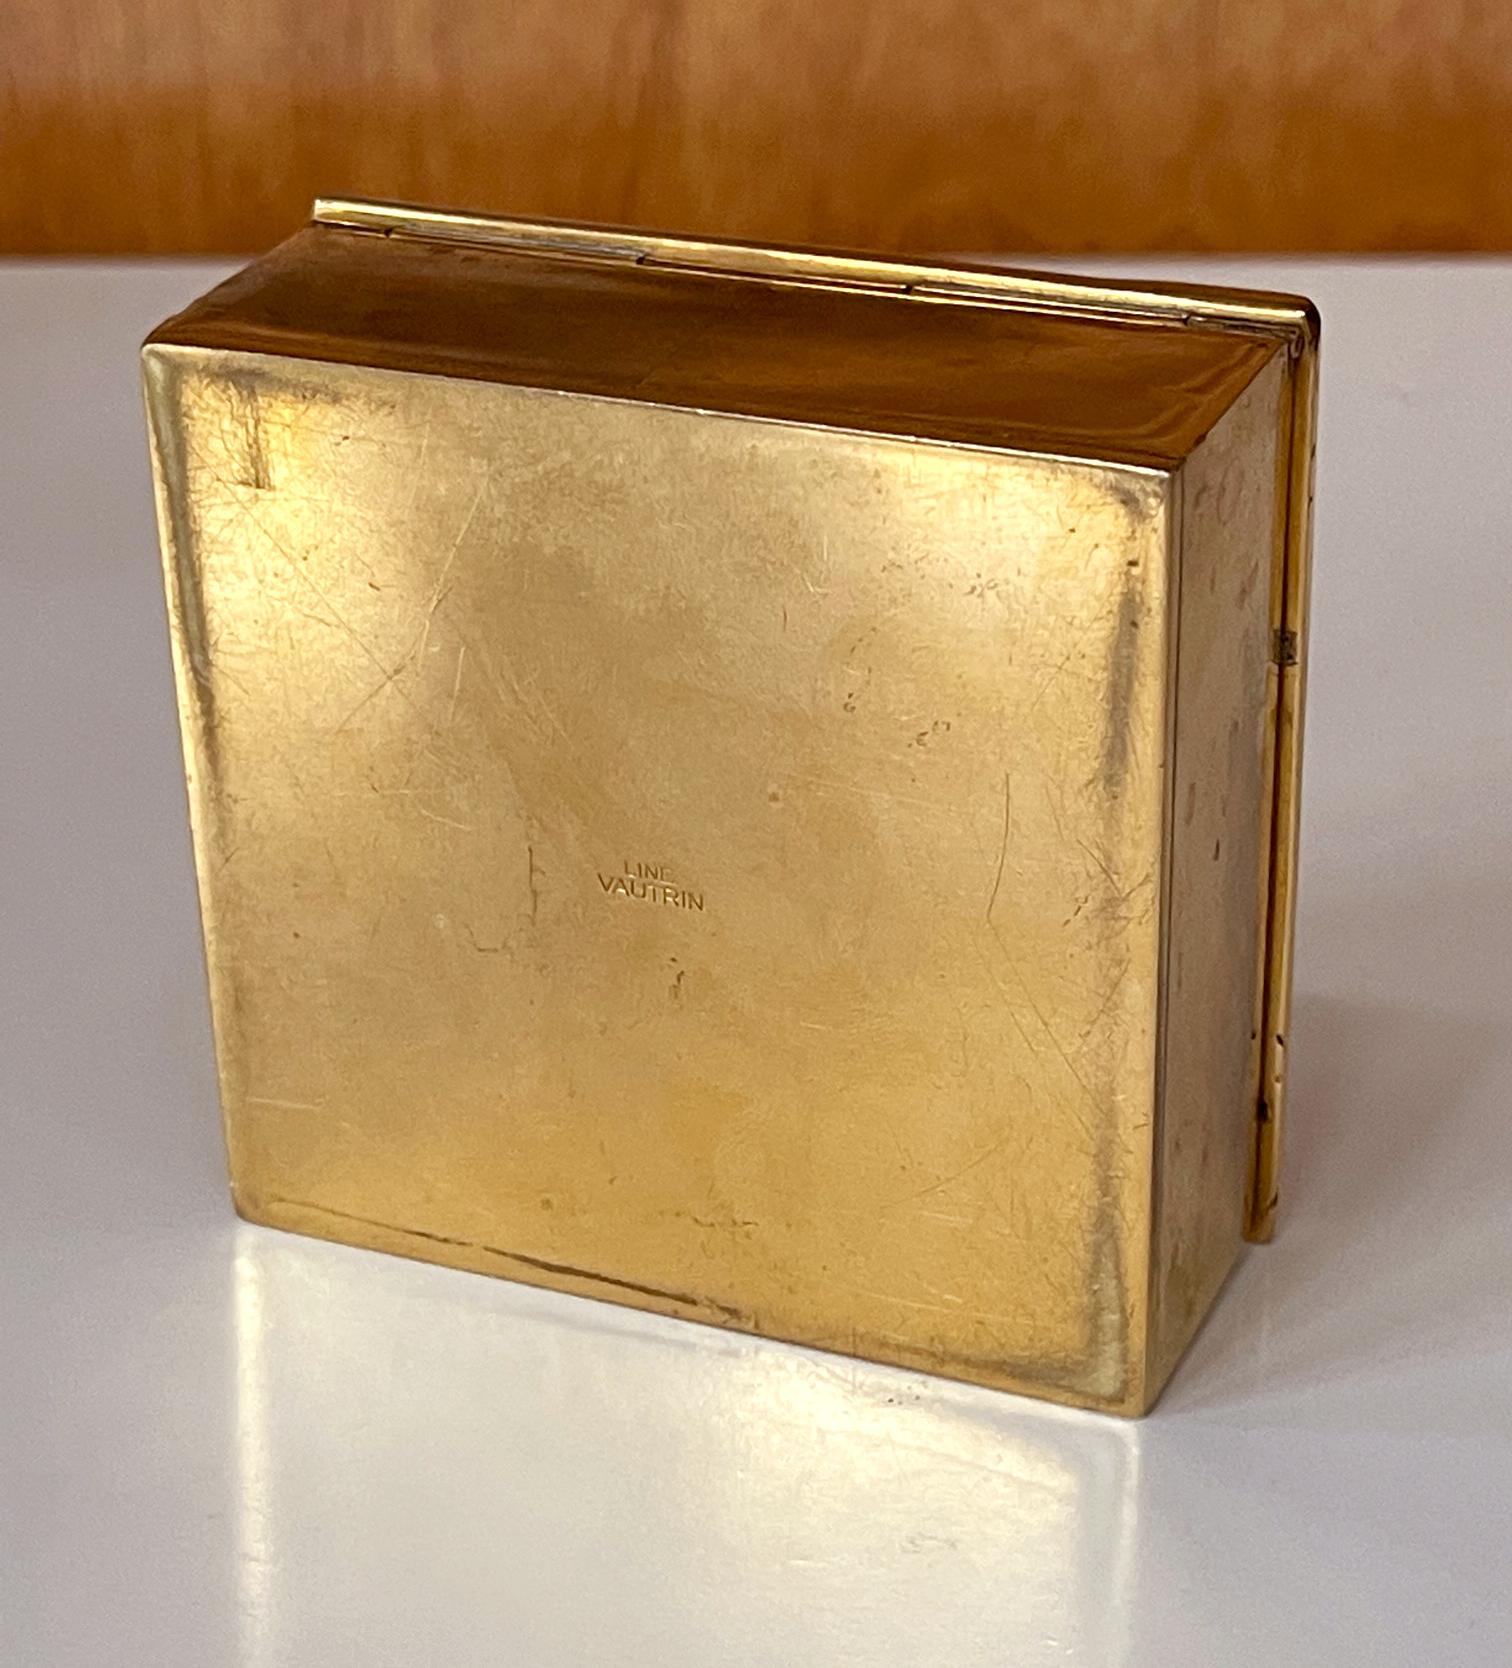 20th Century French Line Vautrin Bronze Poem Box with Sonnet by Felix Arvers For Sale